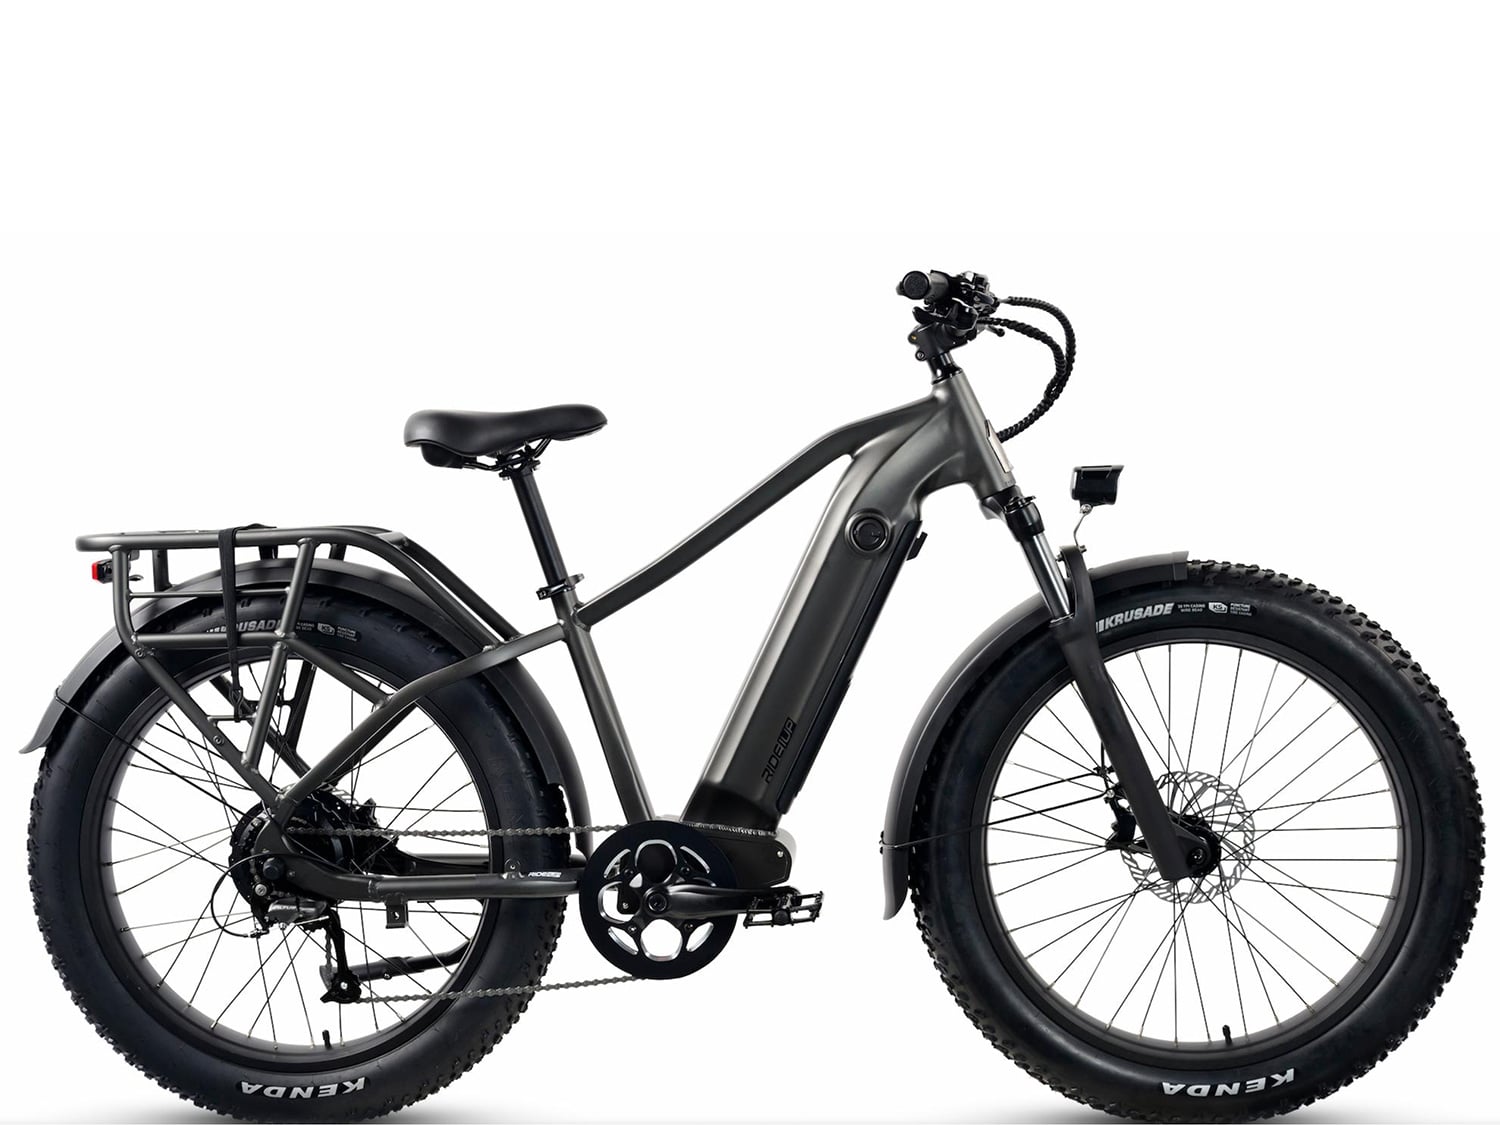 Rift electric bike from Ride1Up